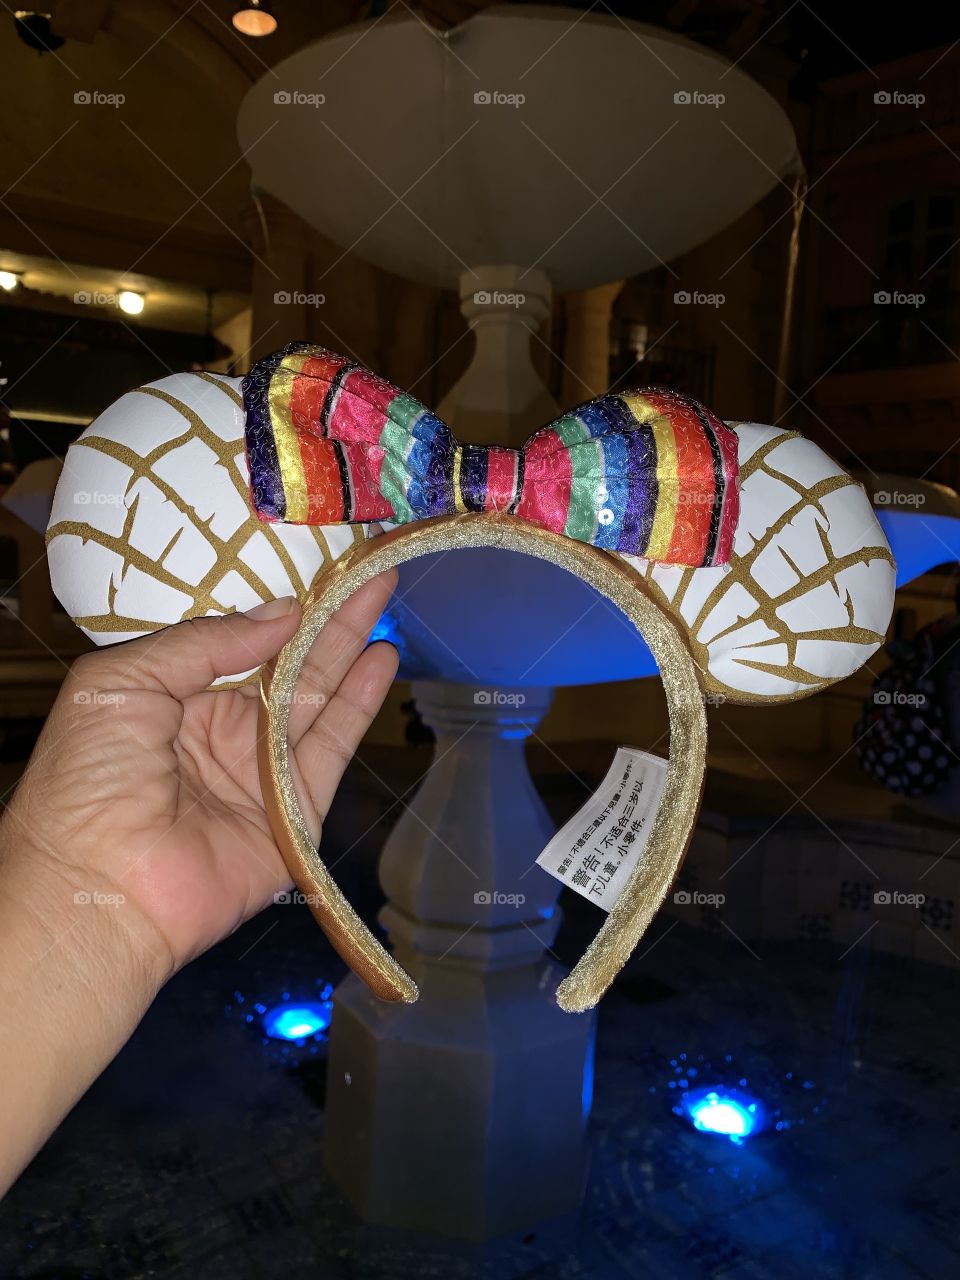 #day128 Everyday WDW Orlando Florida.  I have been lost on Disney Properties consecutively since 4/3/19 You can find my encounter https://www.facebook.com/selsa.susanna or on IG selsa_susanna Epcot 8-8-19 Thursday